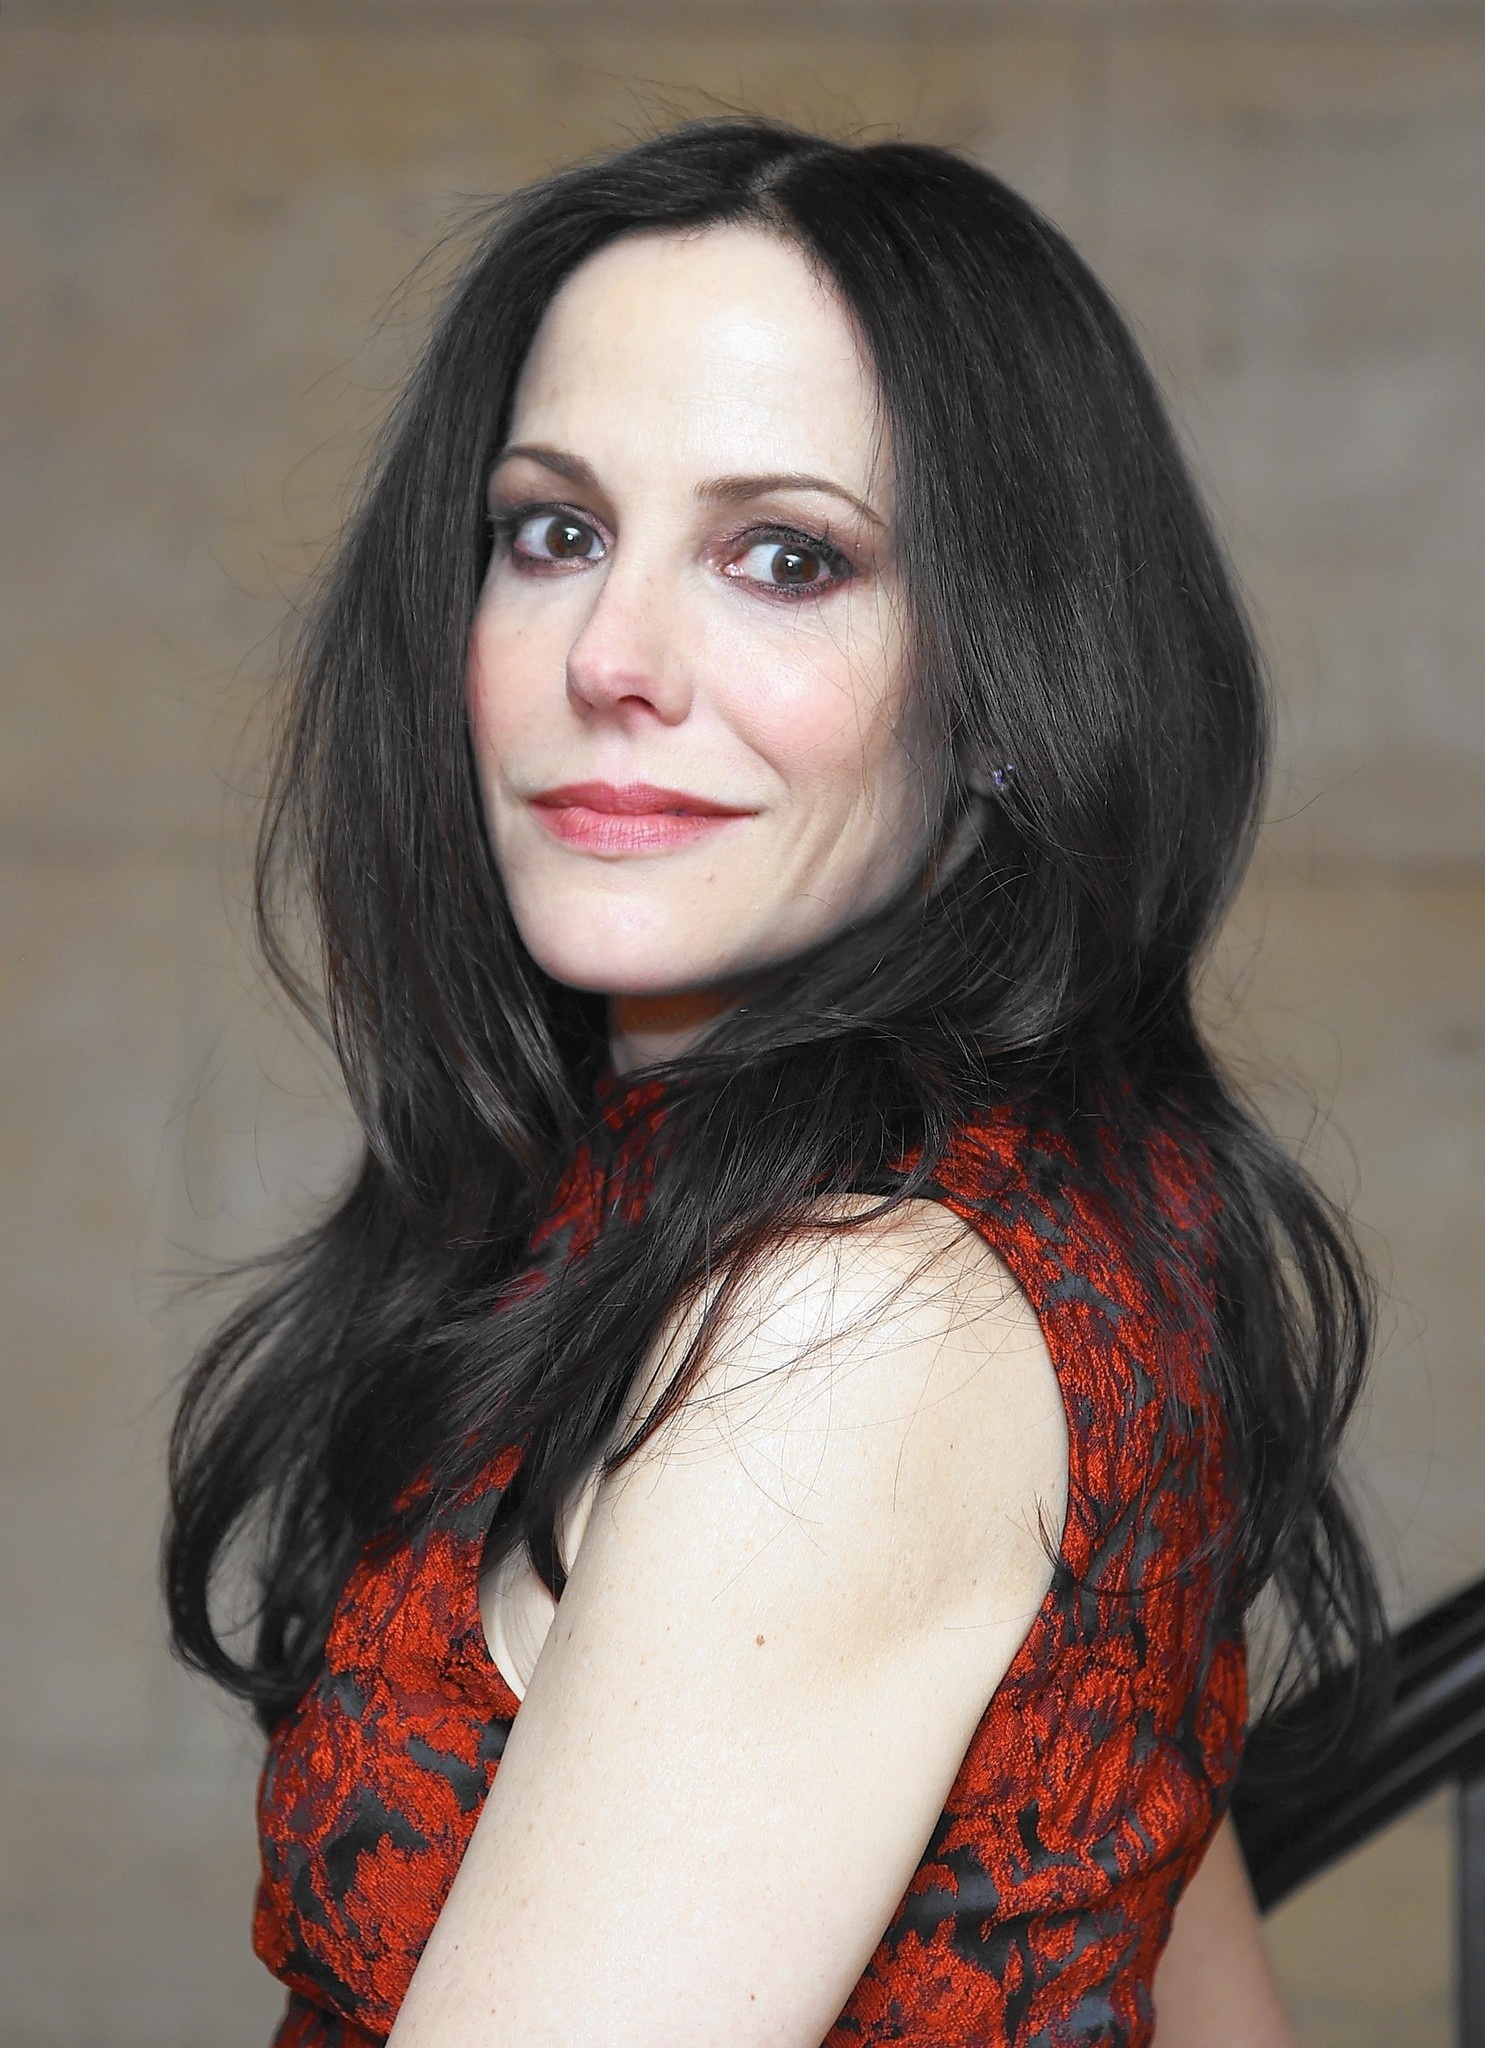 Mary-Louise Parker wallpapers, Celebrity HQ images, Stunning 4K quality, Latest wallpapers, 1490x2050 HD Handy